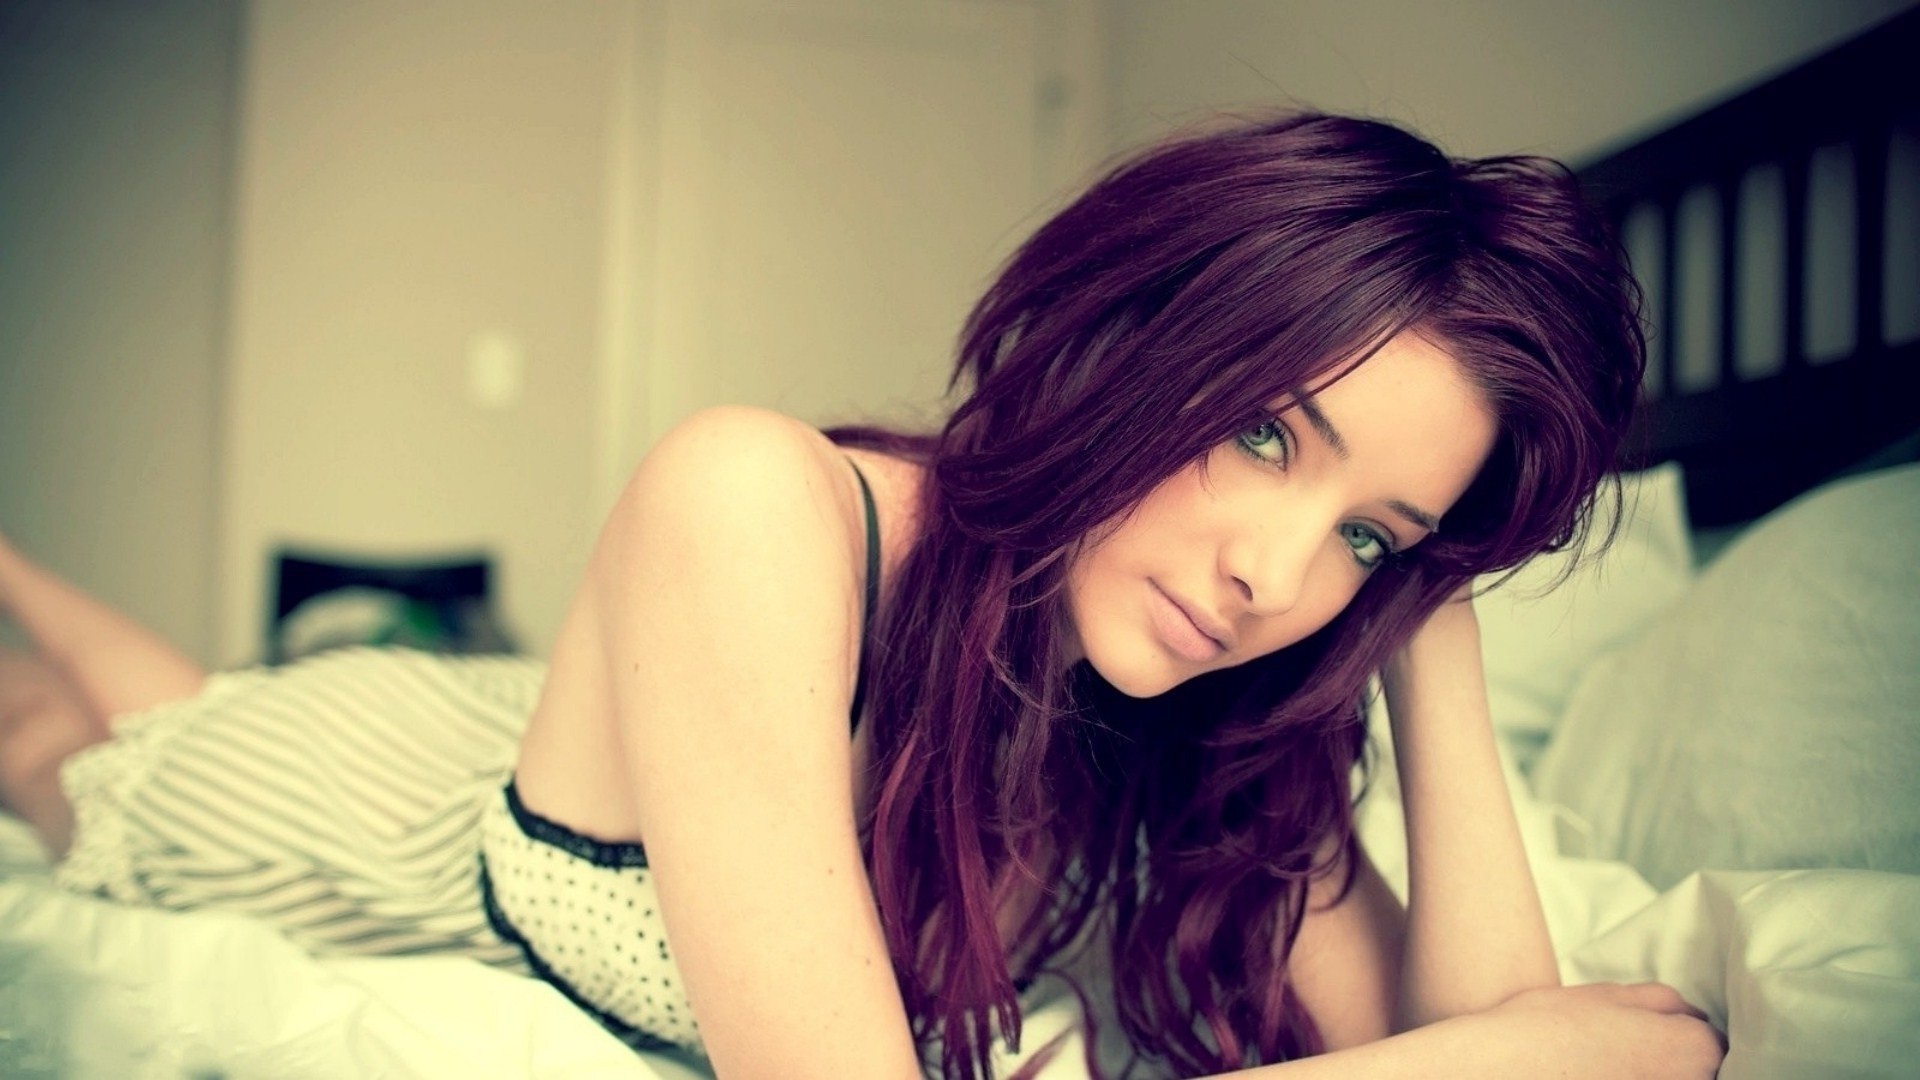 Susan Coffey, Model, Women, In Bed, Blue Eyes, Looking At Viewer, Lying On Front, Lying Down, Purple Hair, Dyed Hair, Hands In Hair, Redhead Wallpaper